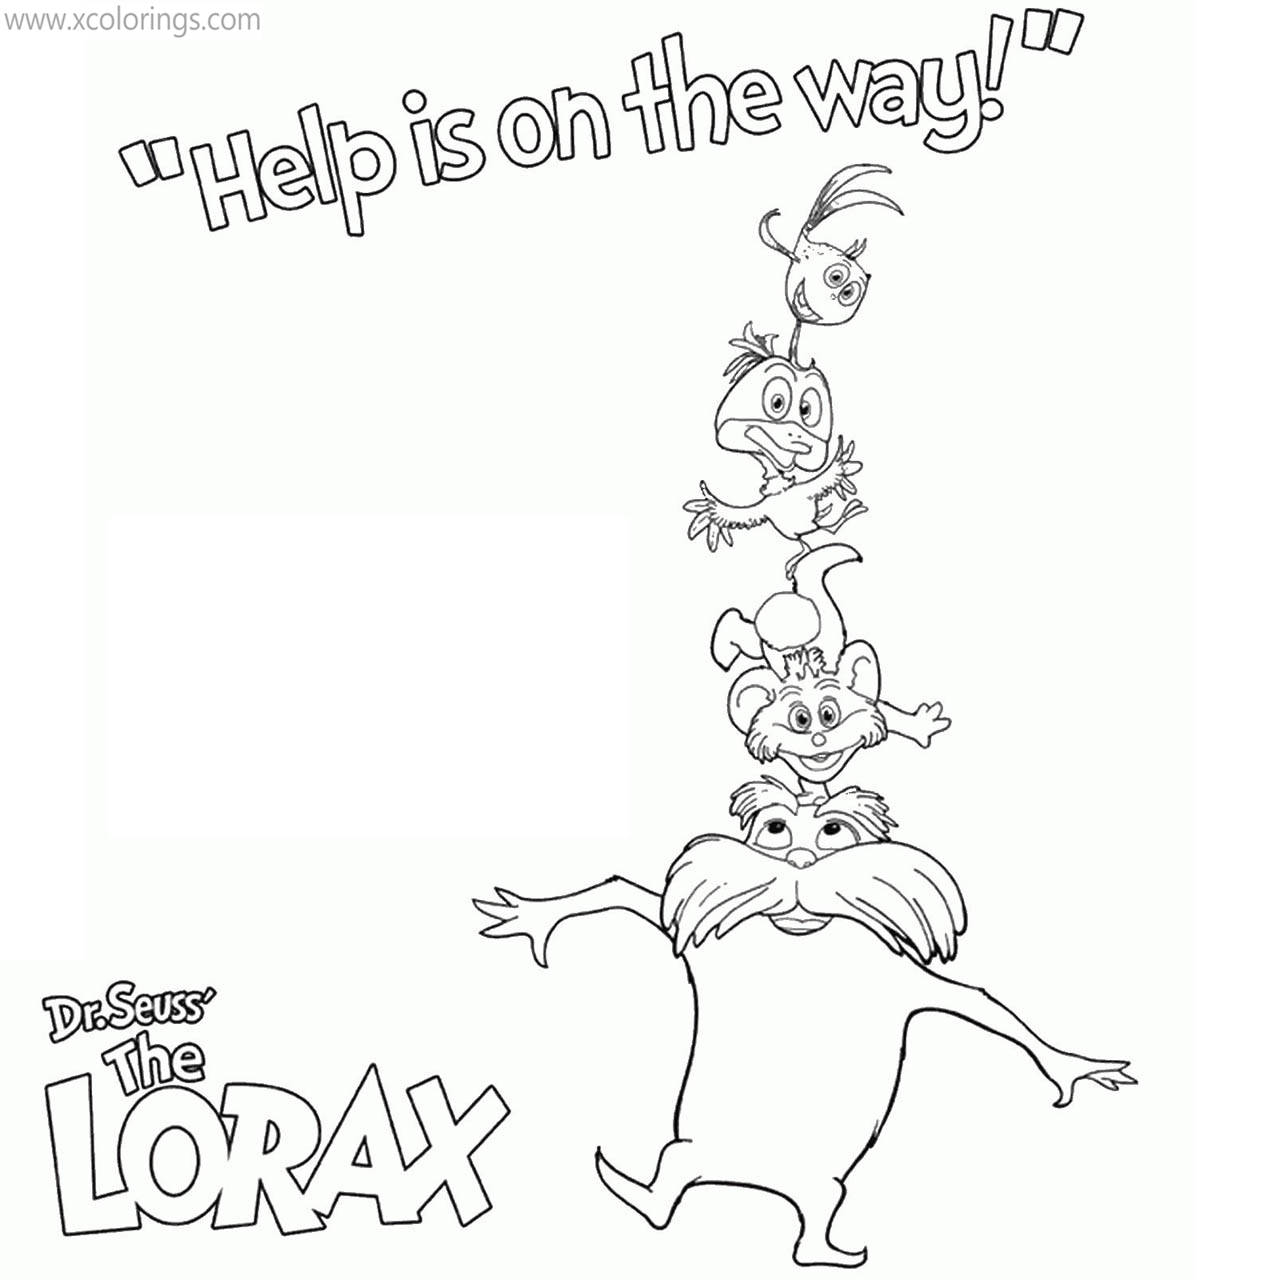 Free Lorax Characters Coloring Pages Animal Friends printable